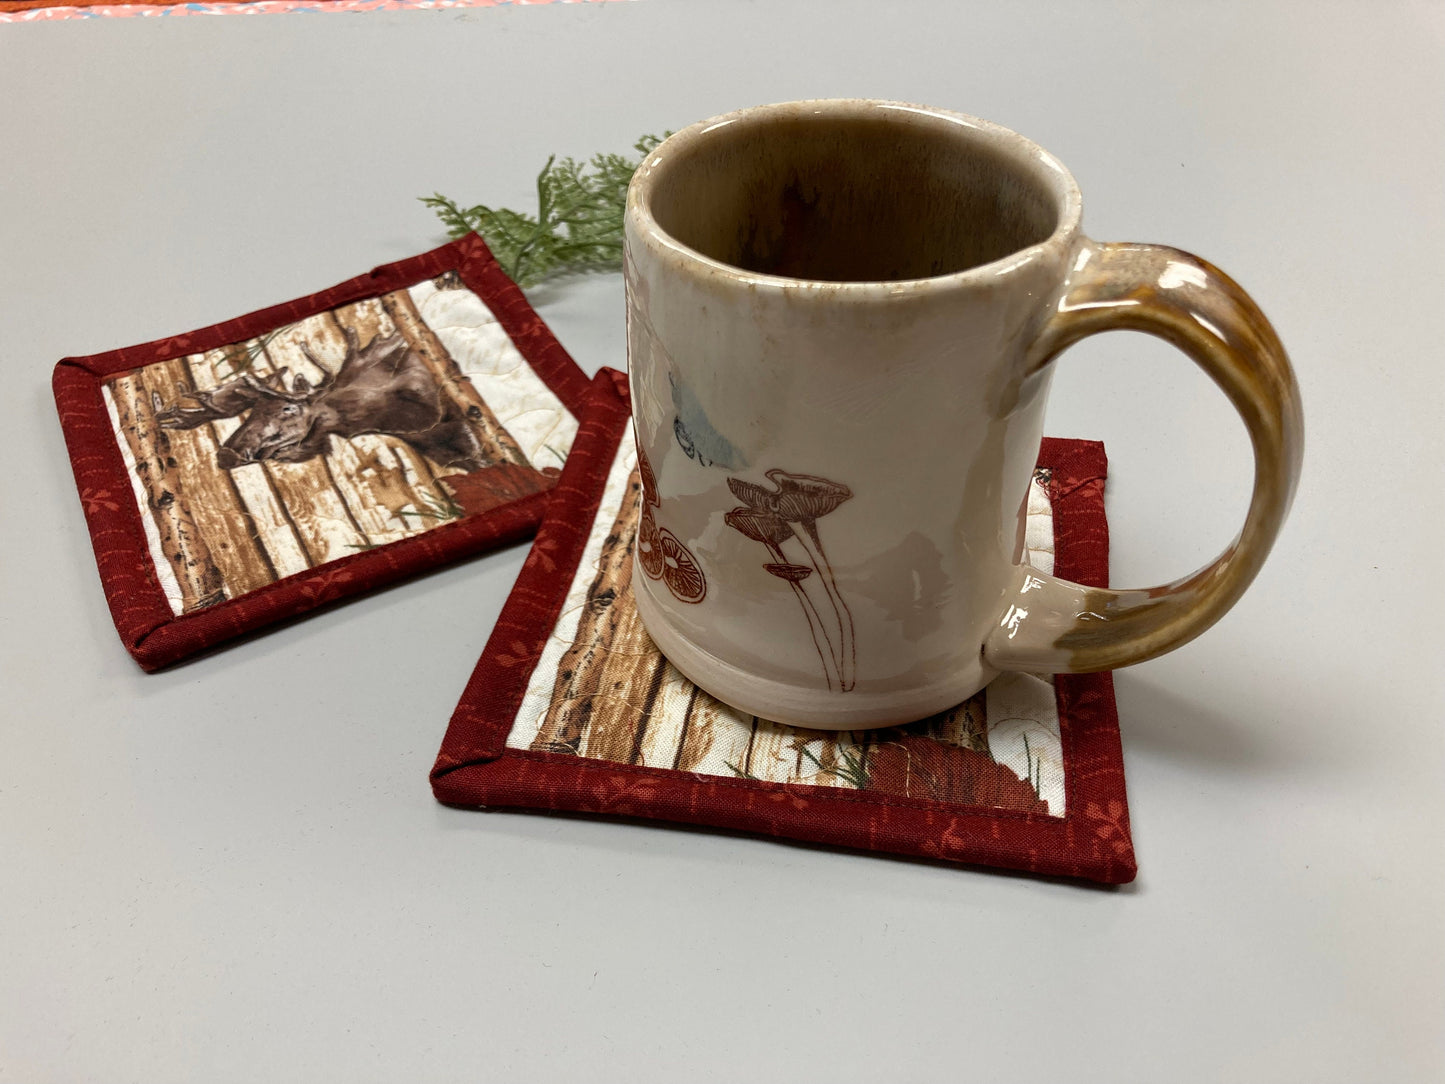 Fall Moose Head Mancave Mug Rug Snack Mats 5x5" Large Fabric Hot Cold Coasters Washable Table, Everyday Cabin Rustic Lodge Hunting Animal